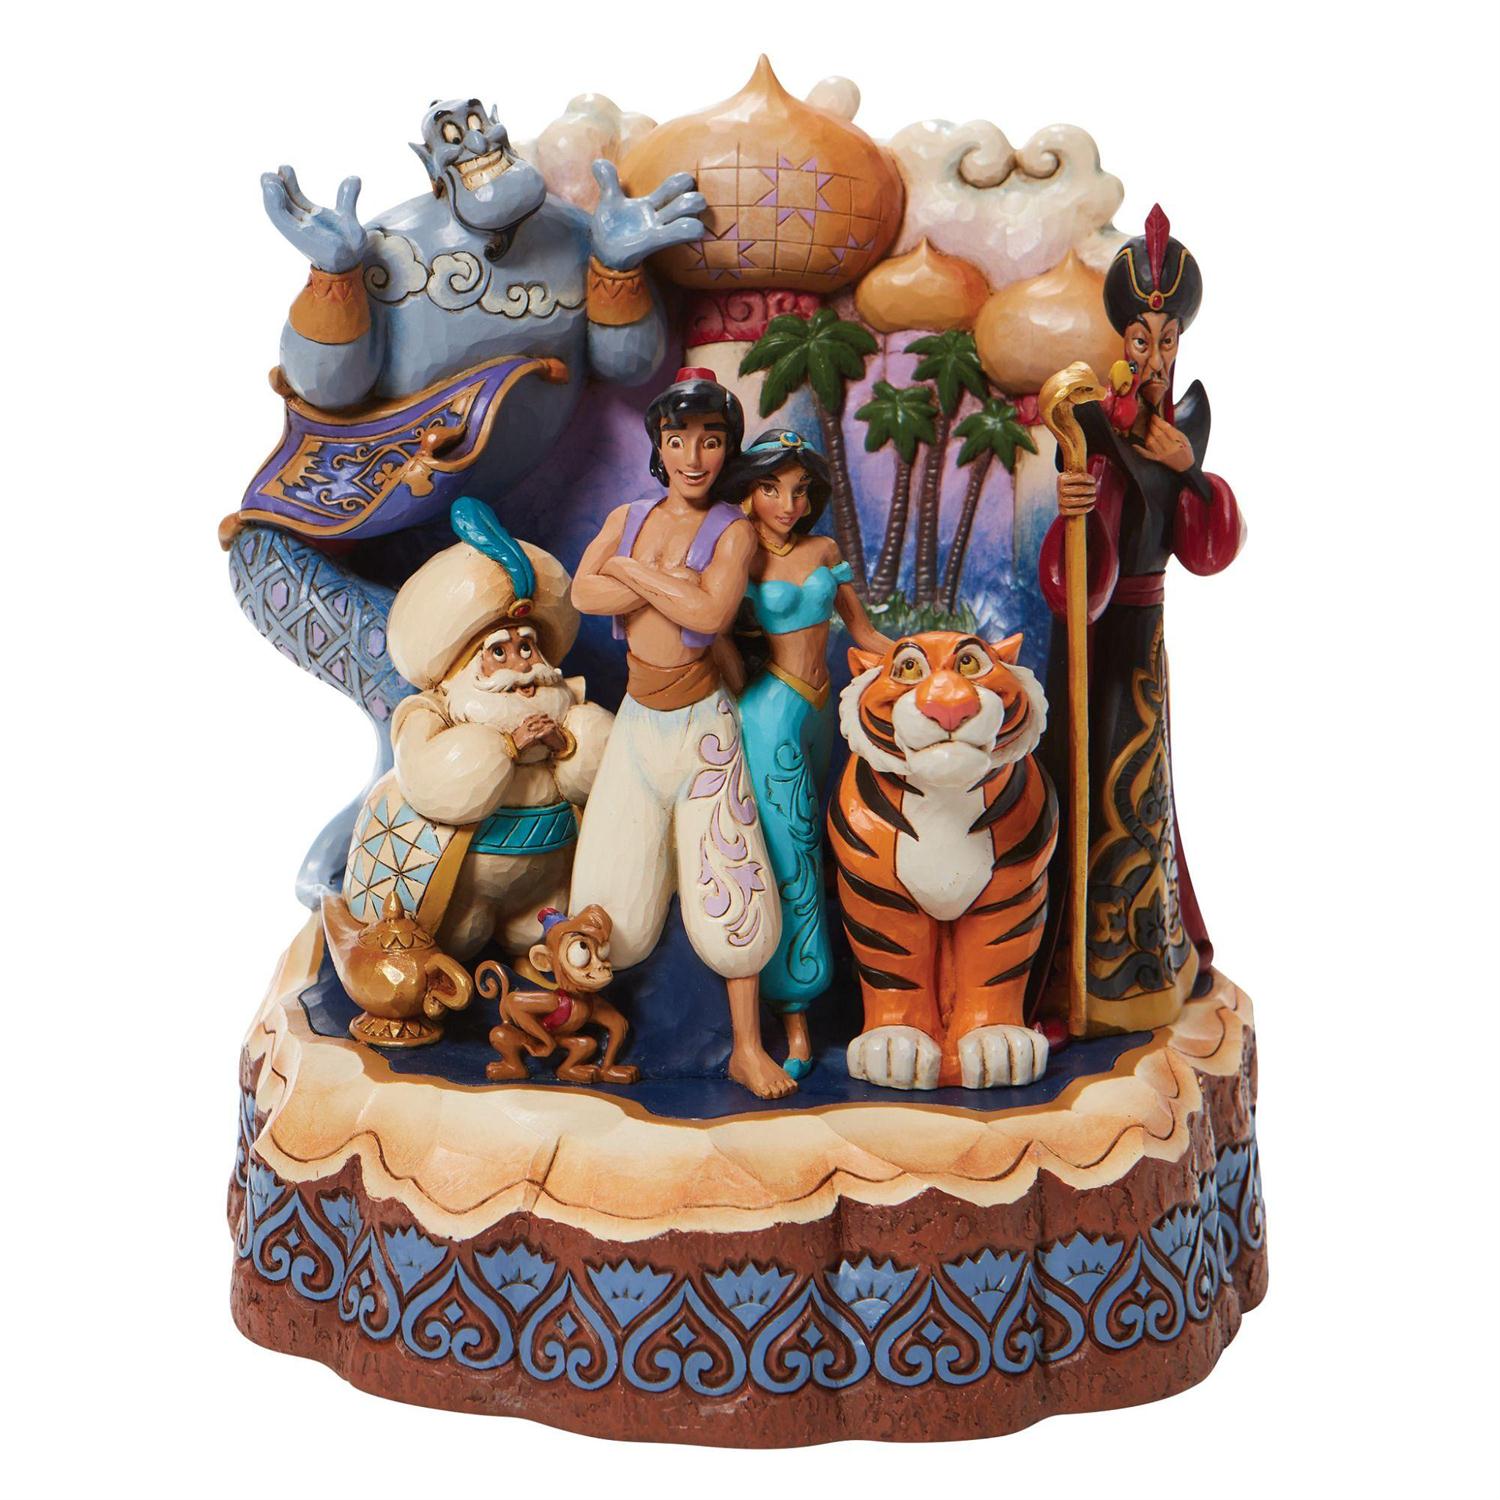 Aladdin and Jasmine take center stage as Abu, Rajah, and the Sultan smile close by.